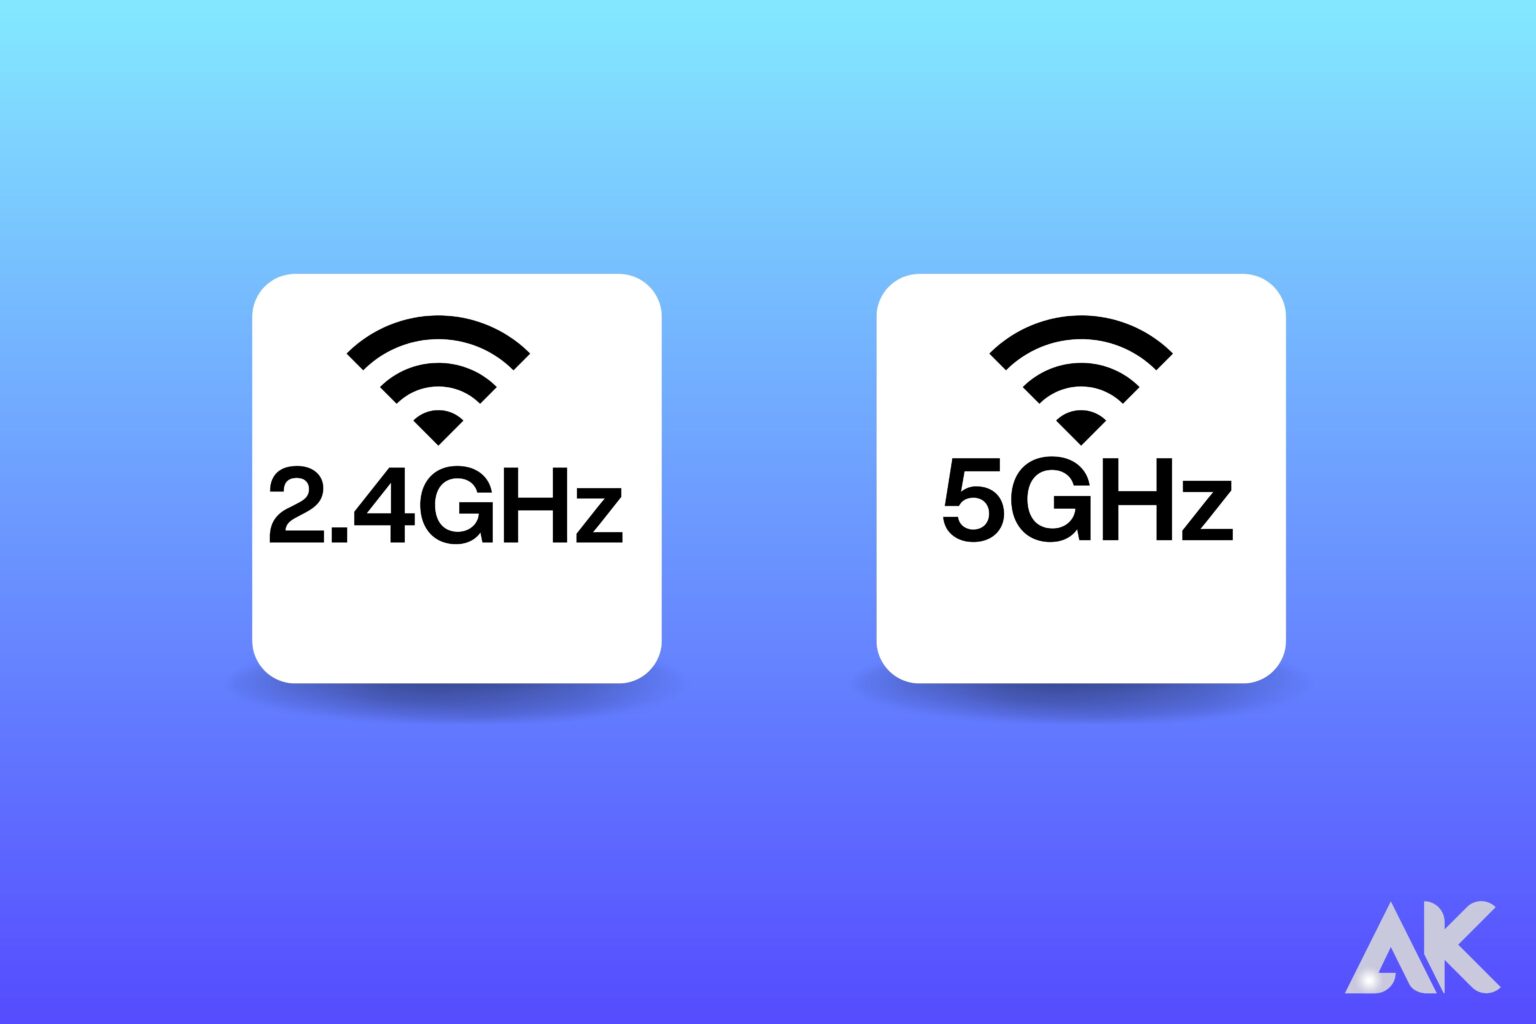 How do I utilize 2.4GHz and 5GHz WiFi? What's the difference?